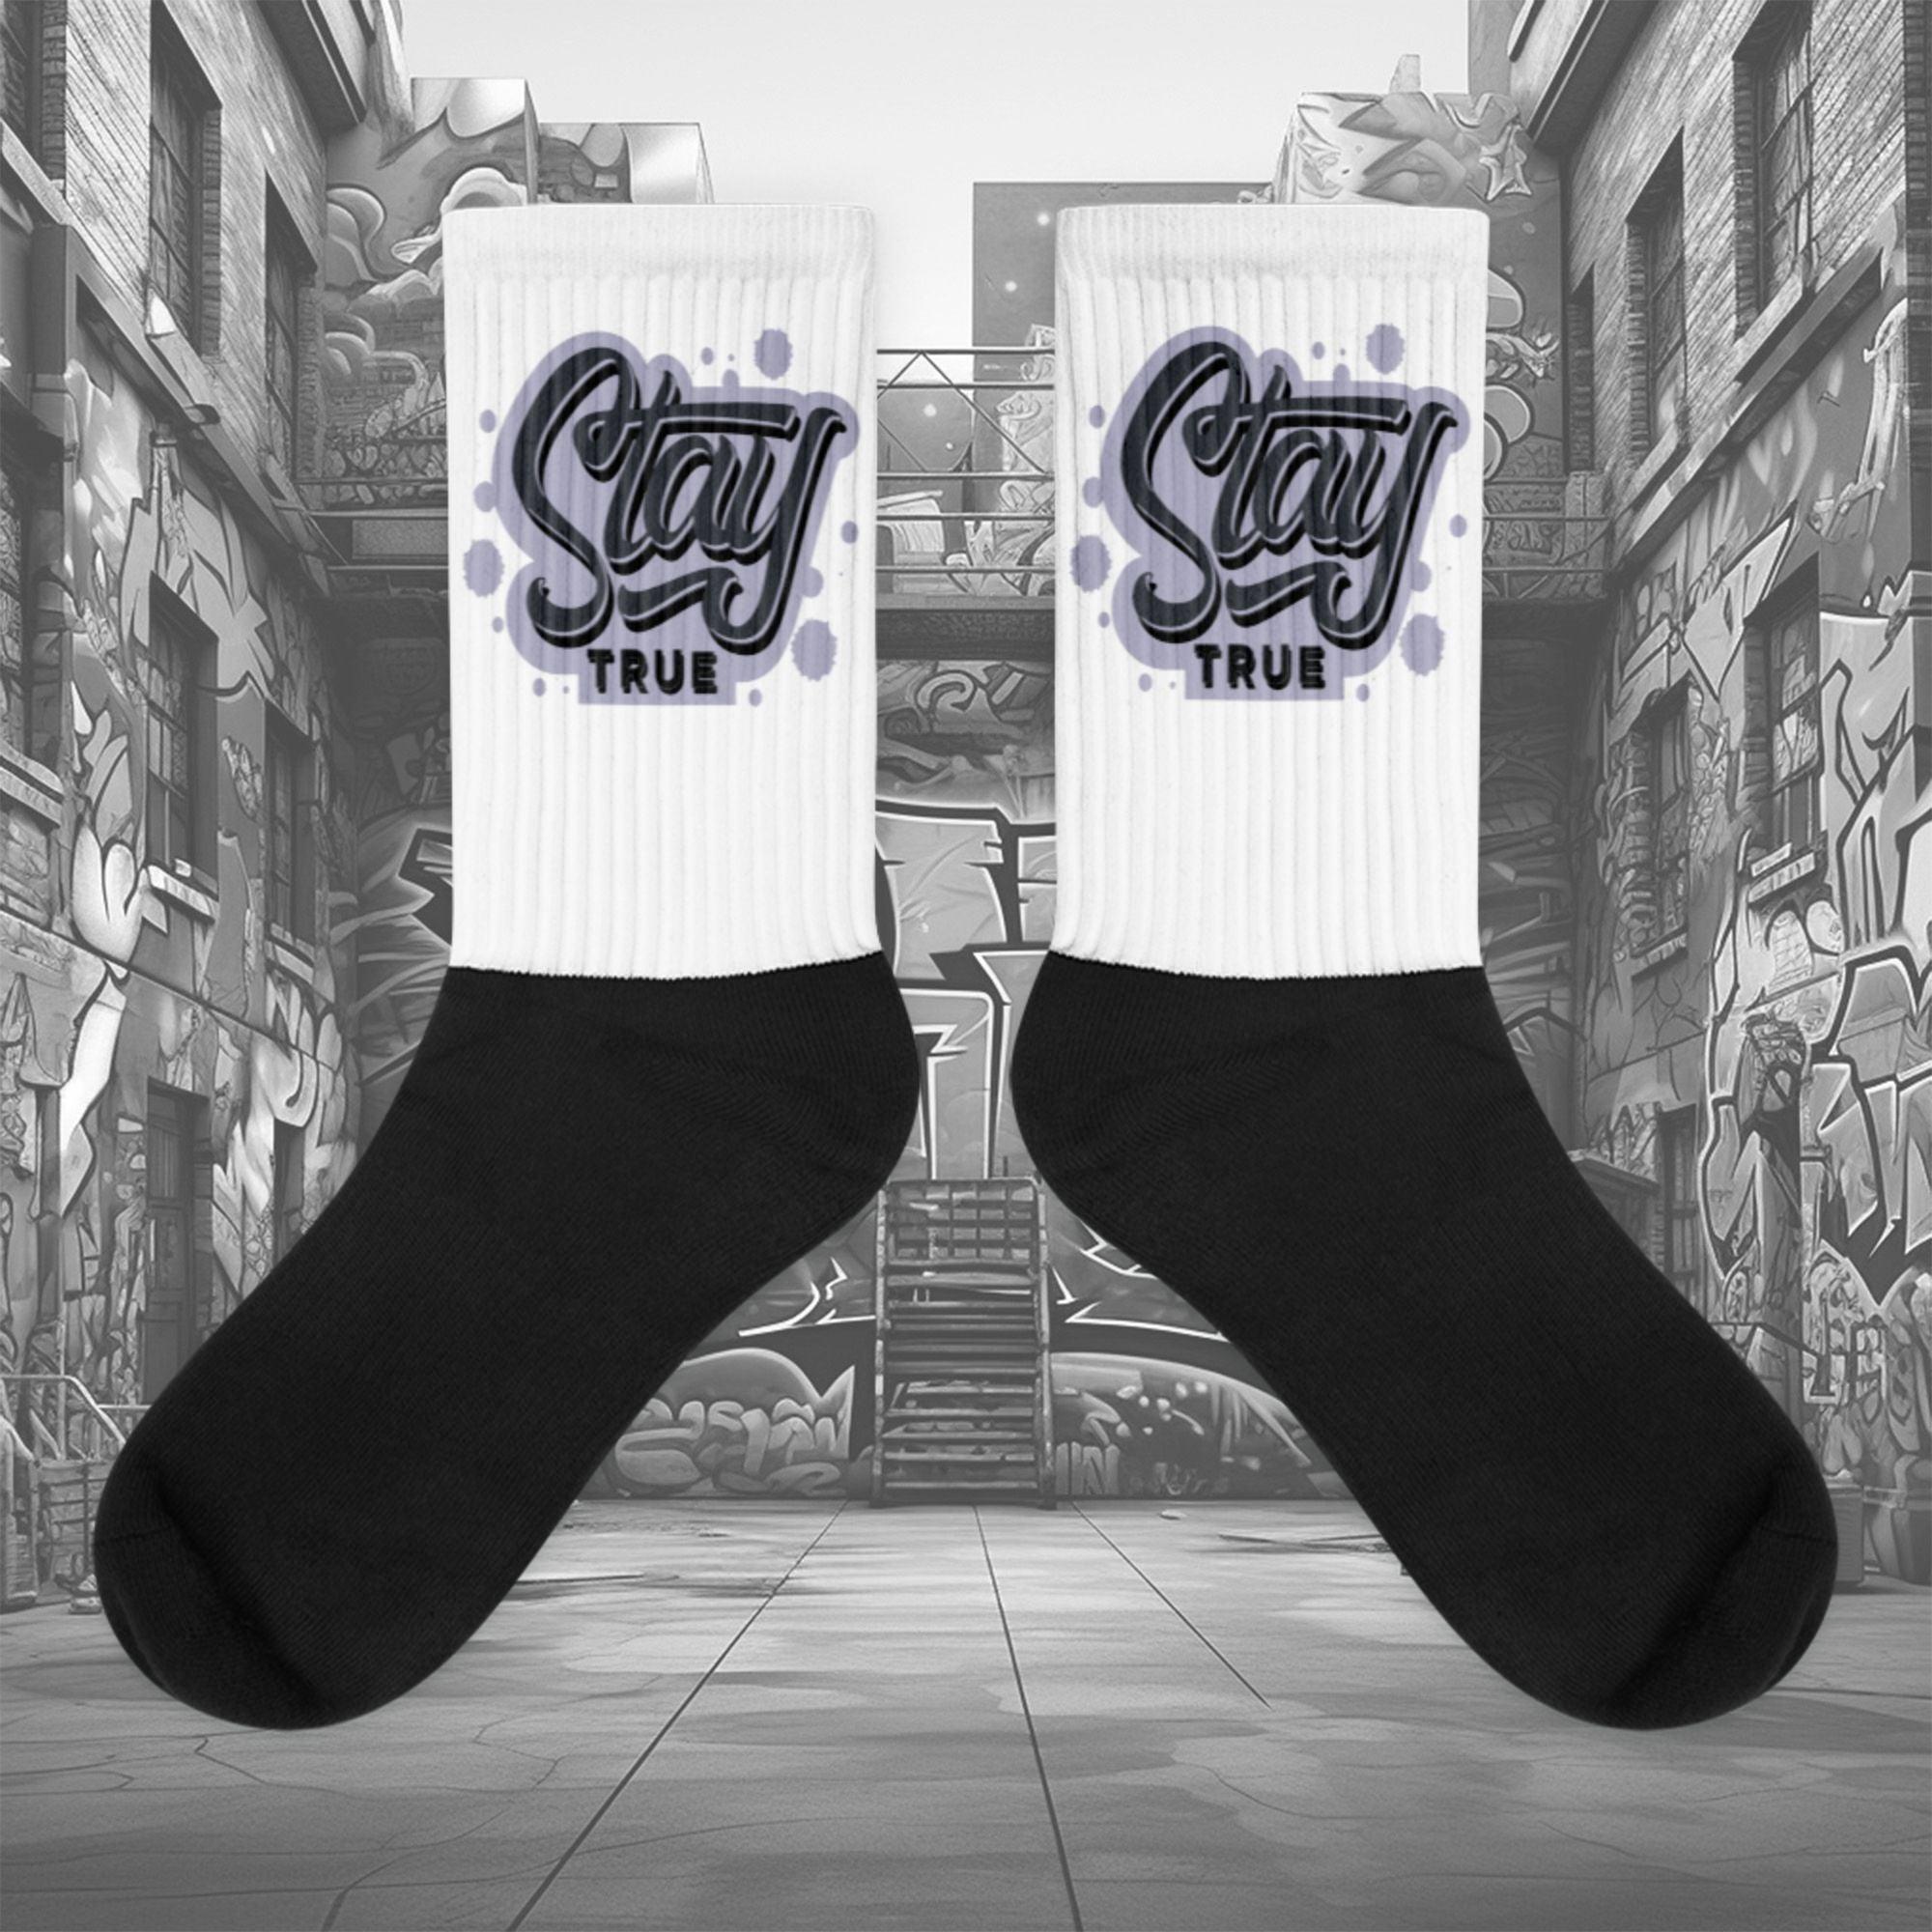  Showcases the view of the socks, highlighting the vibrant 'Stay True' design, which perfectly complements the Air Jordan 8 Winterized  sneakers. The intricate pattern and color scheme inspired by the  theme are prominently displayed.  Focusing on the ribbed leg , cusioned bottoms and the snug fit of the socks. This angle provides a clear view of the texture and quality of the material blend.